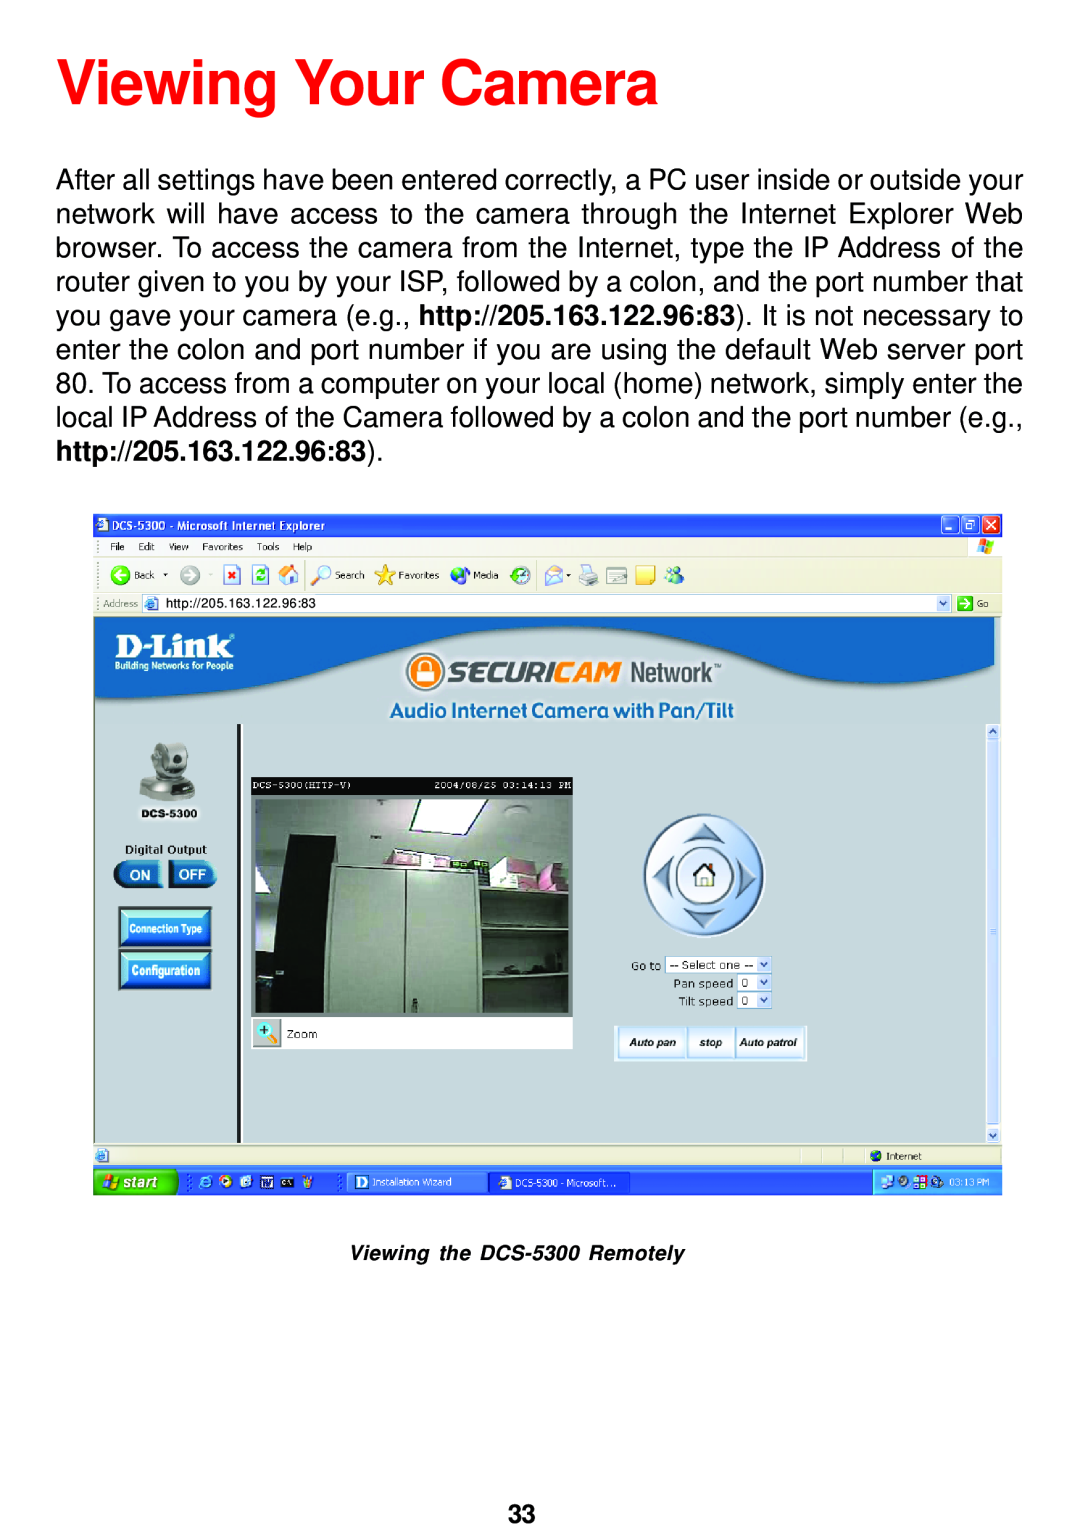 D-Link manual Viewing Your Camera, Viewing the DCS-5300 Remotely 